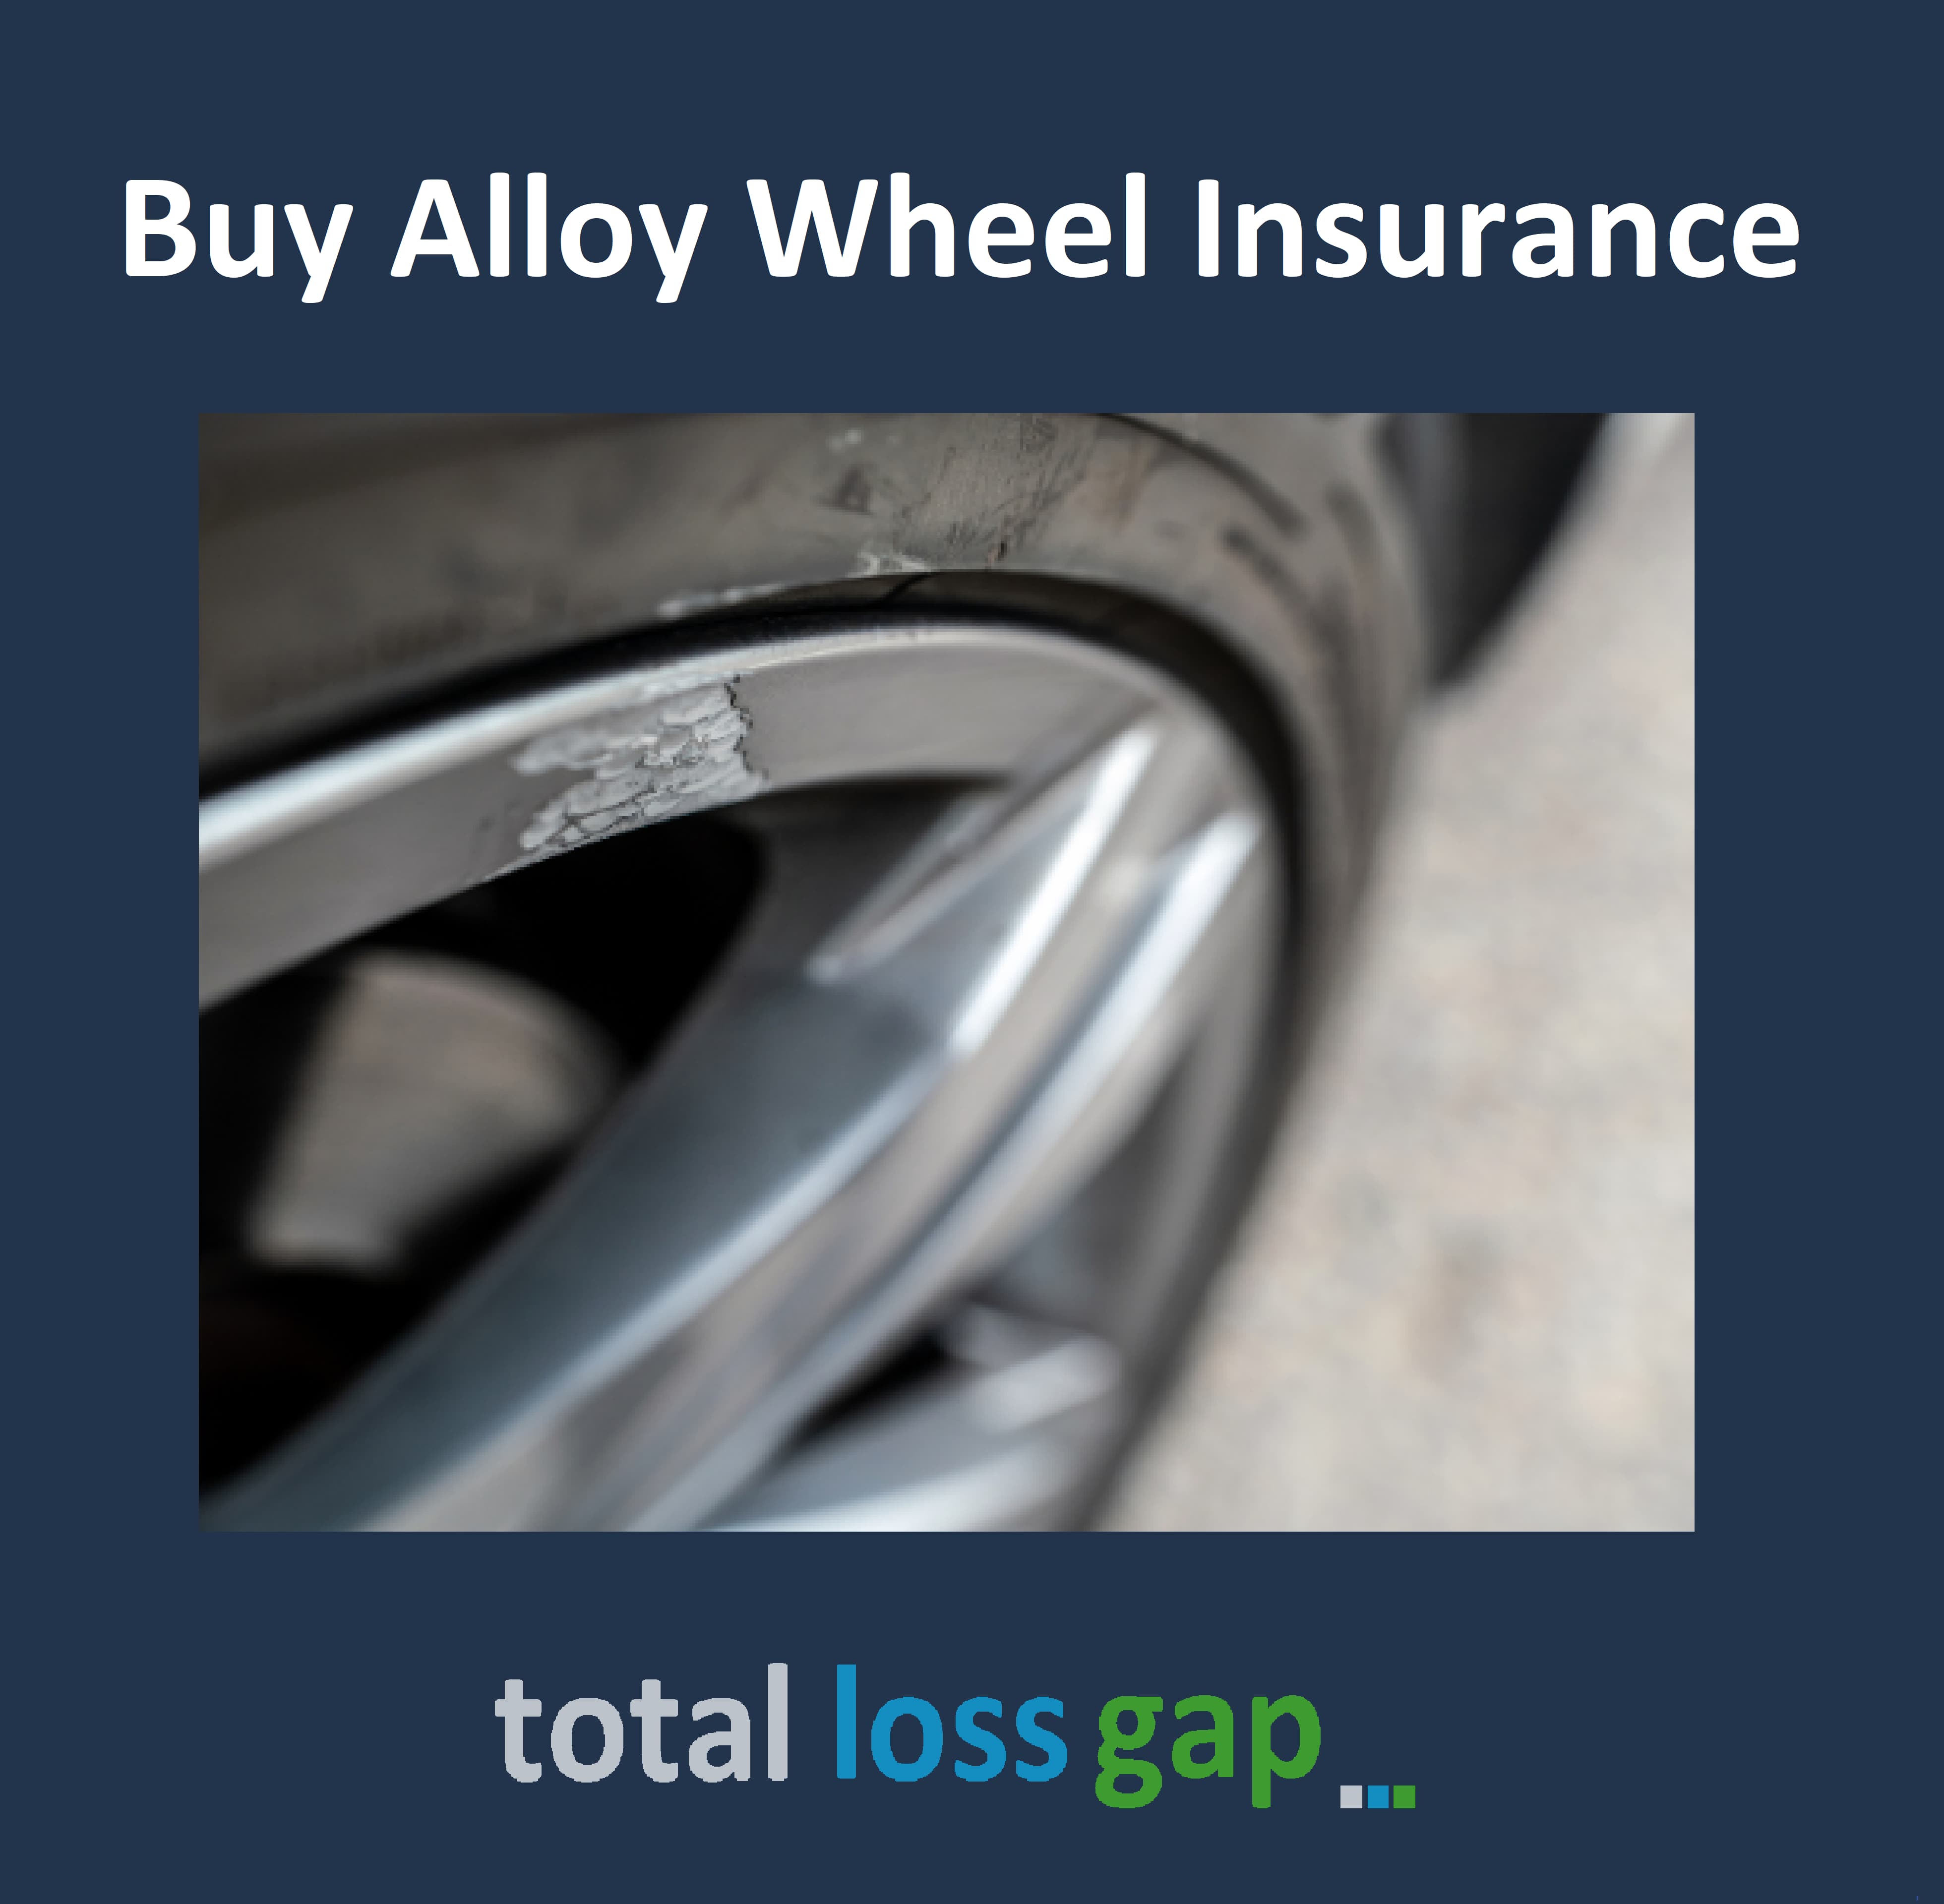 Protect your alloy wheels